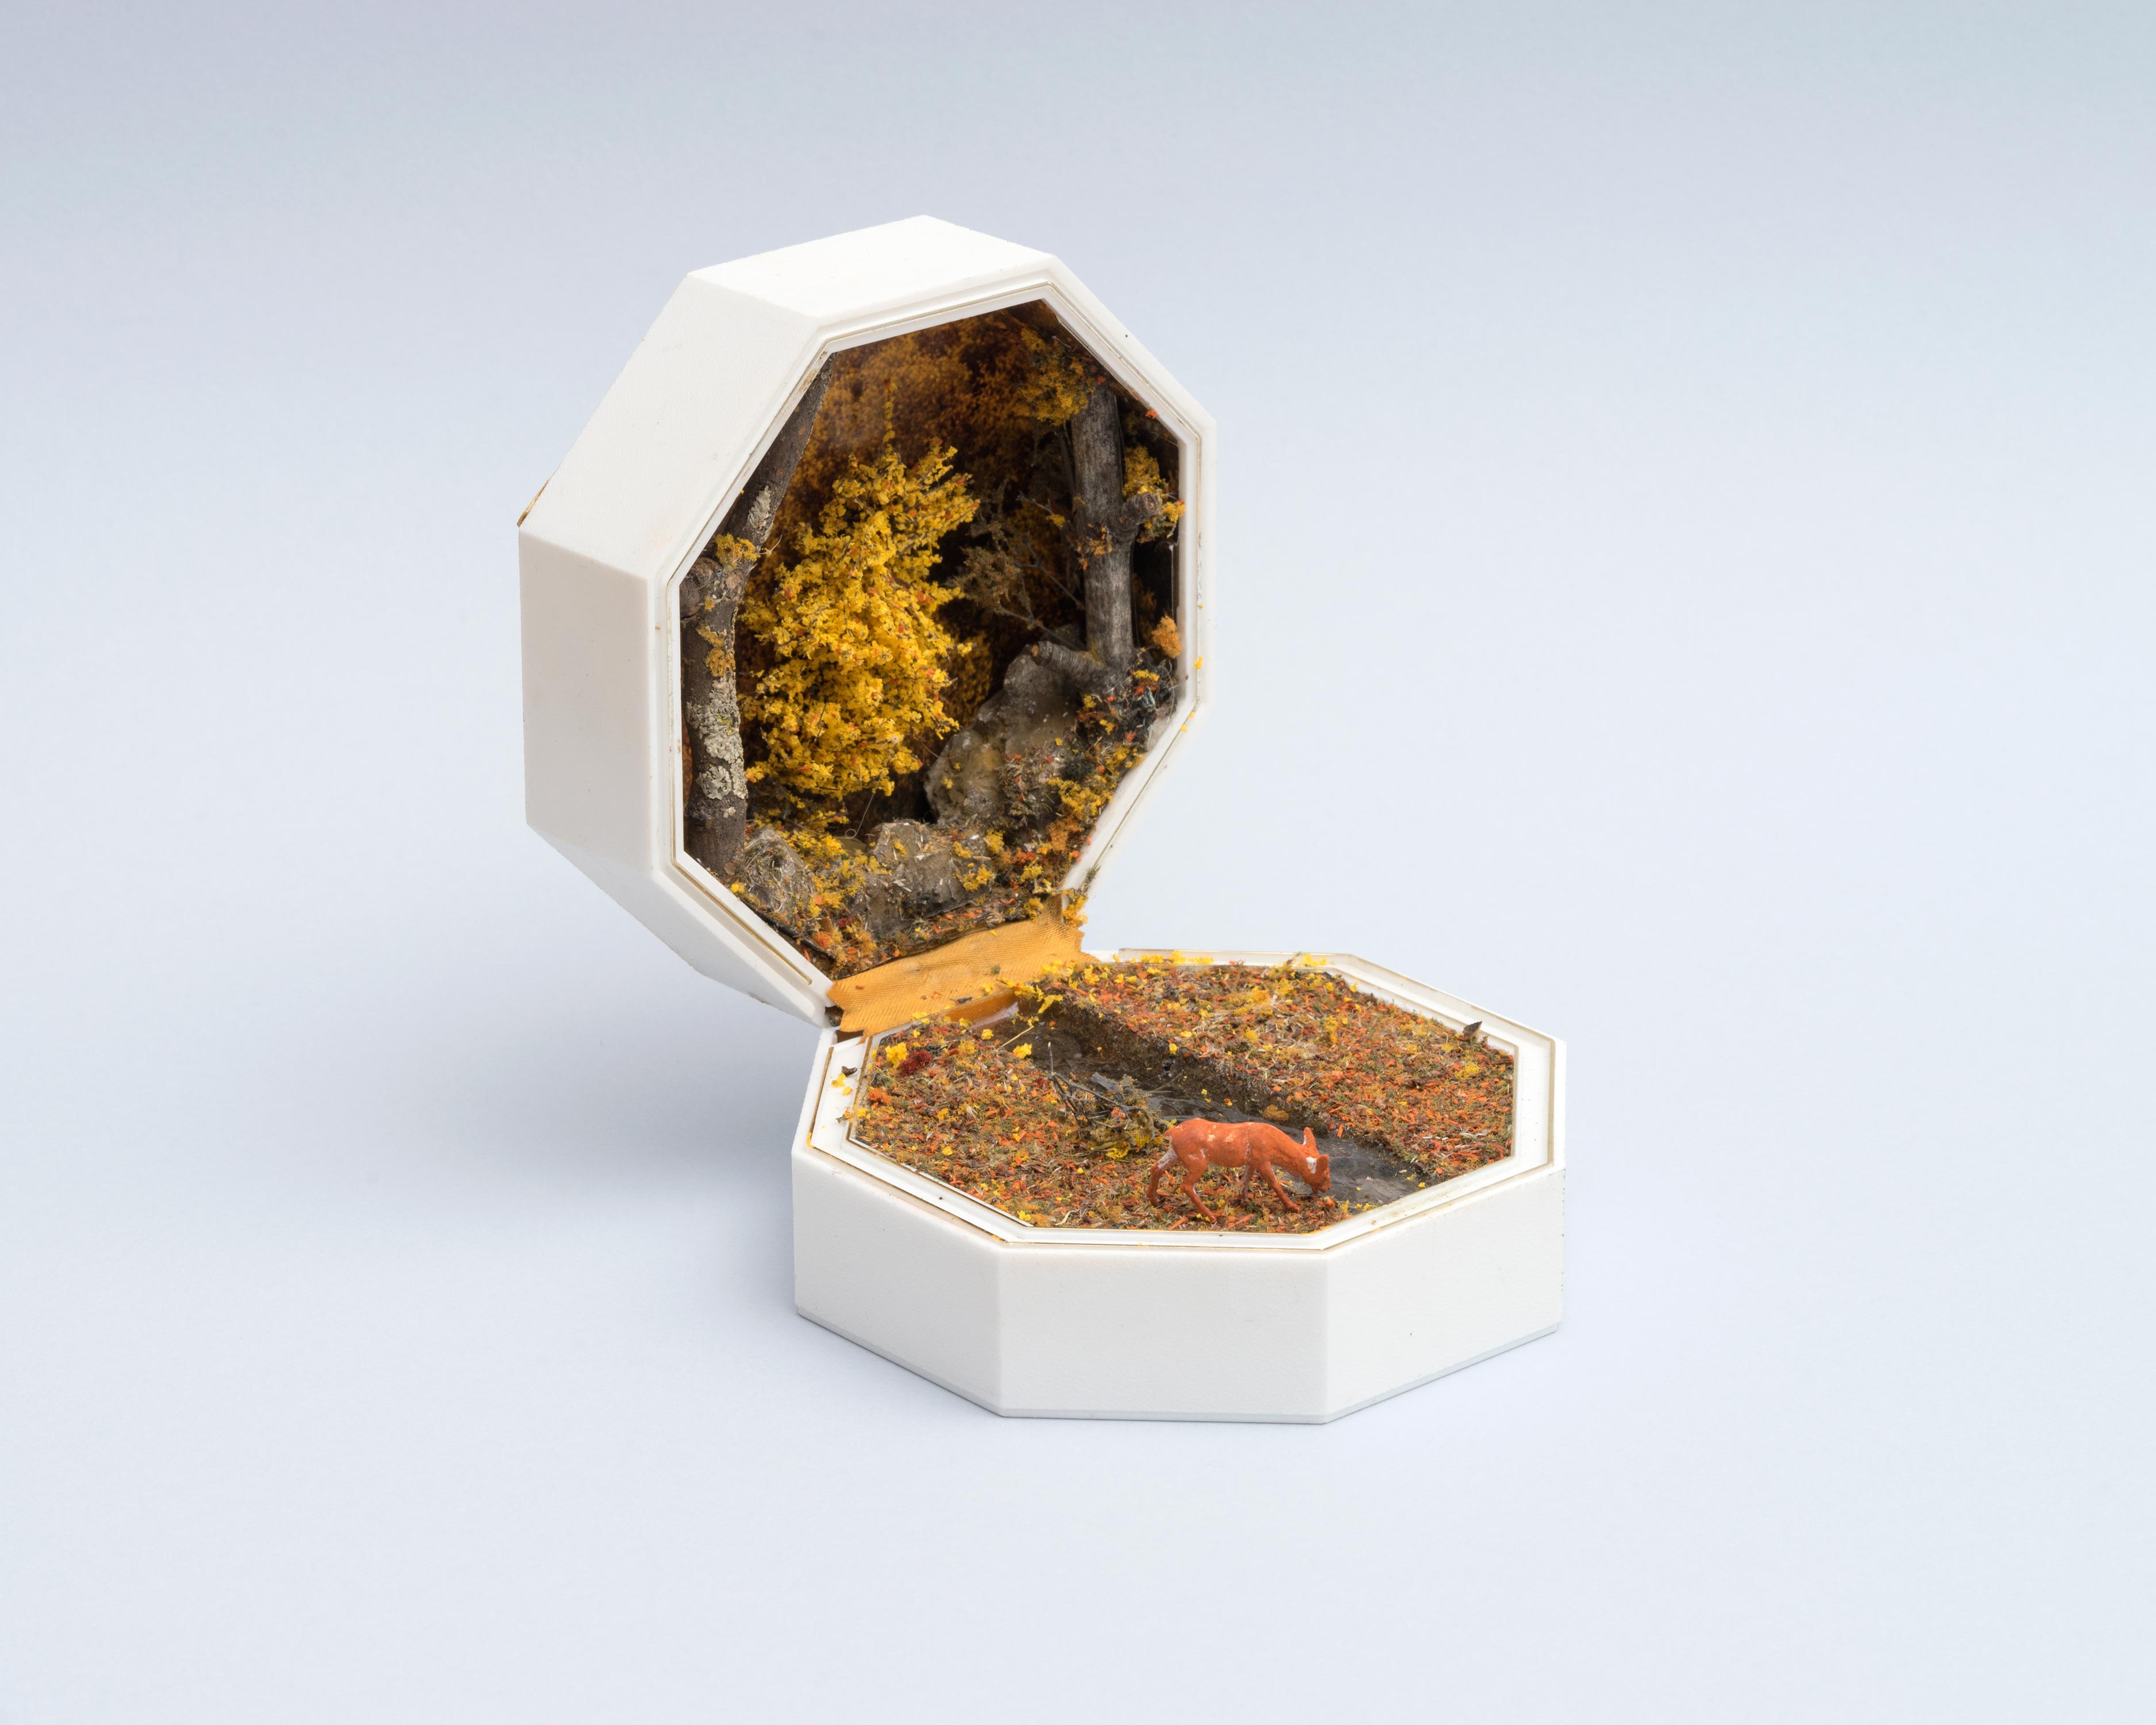 Curtis Talwst Santiago<br>Nanganesey Creek With Deer<br>2016<br>Mixed media diorama in reclaimed jewelry box<br>4.375 x 4.375 x 5.5  in (11 x 11 x 14 cm)